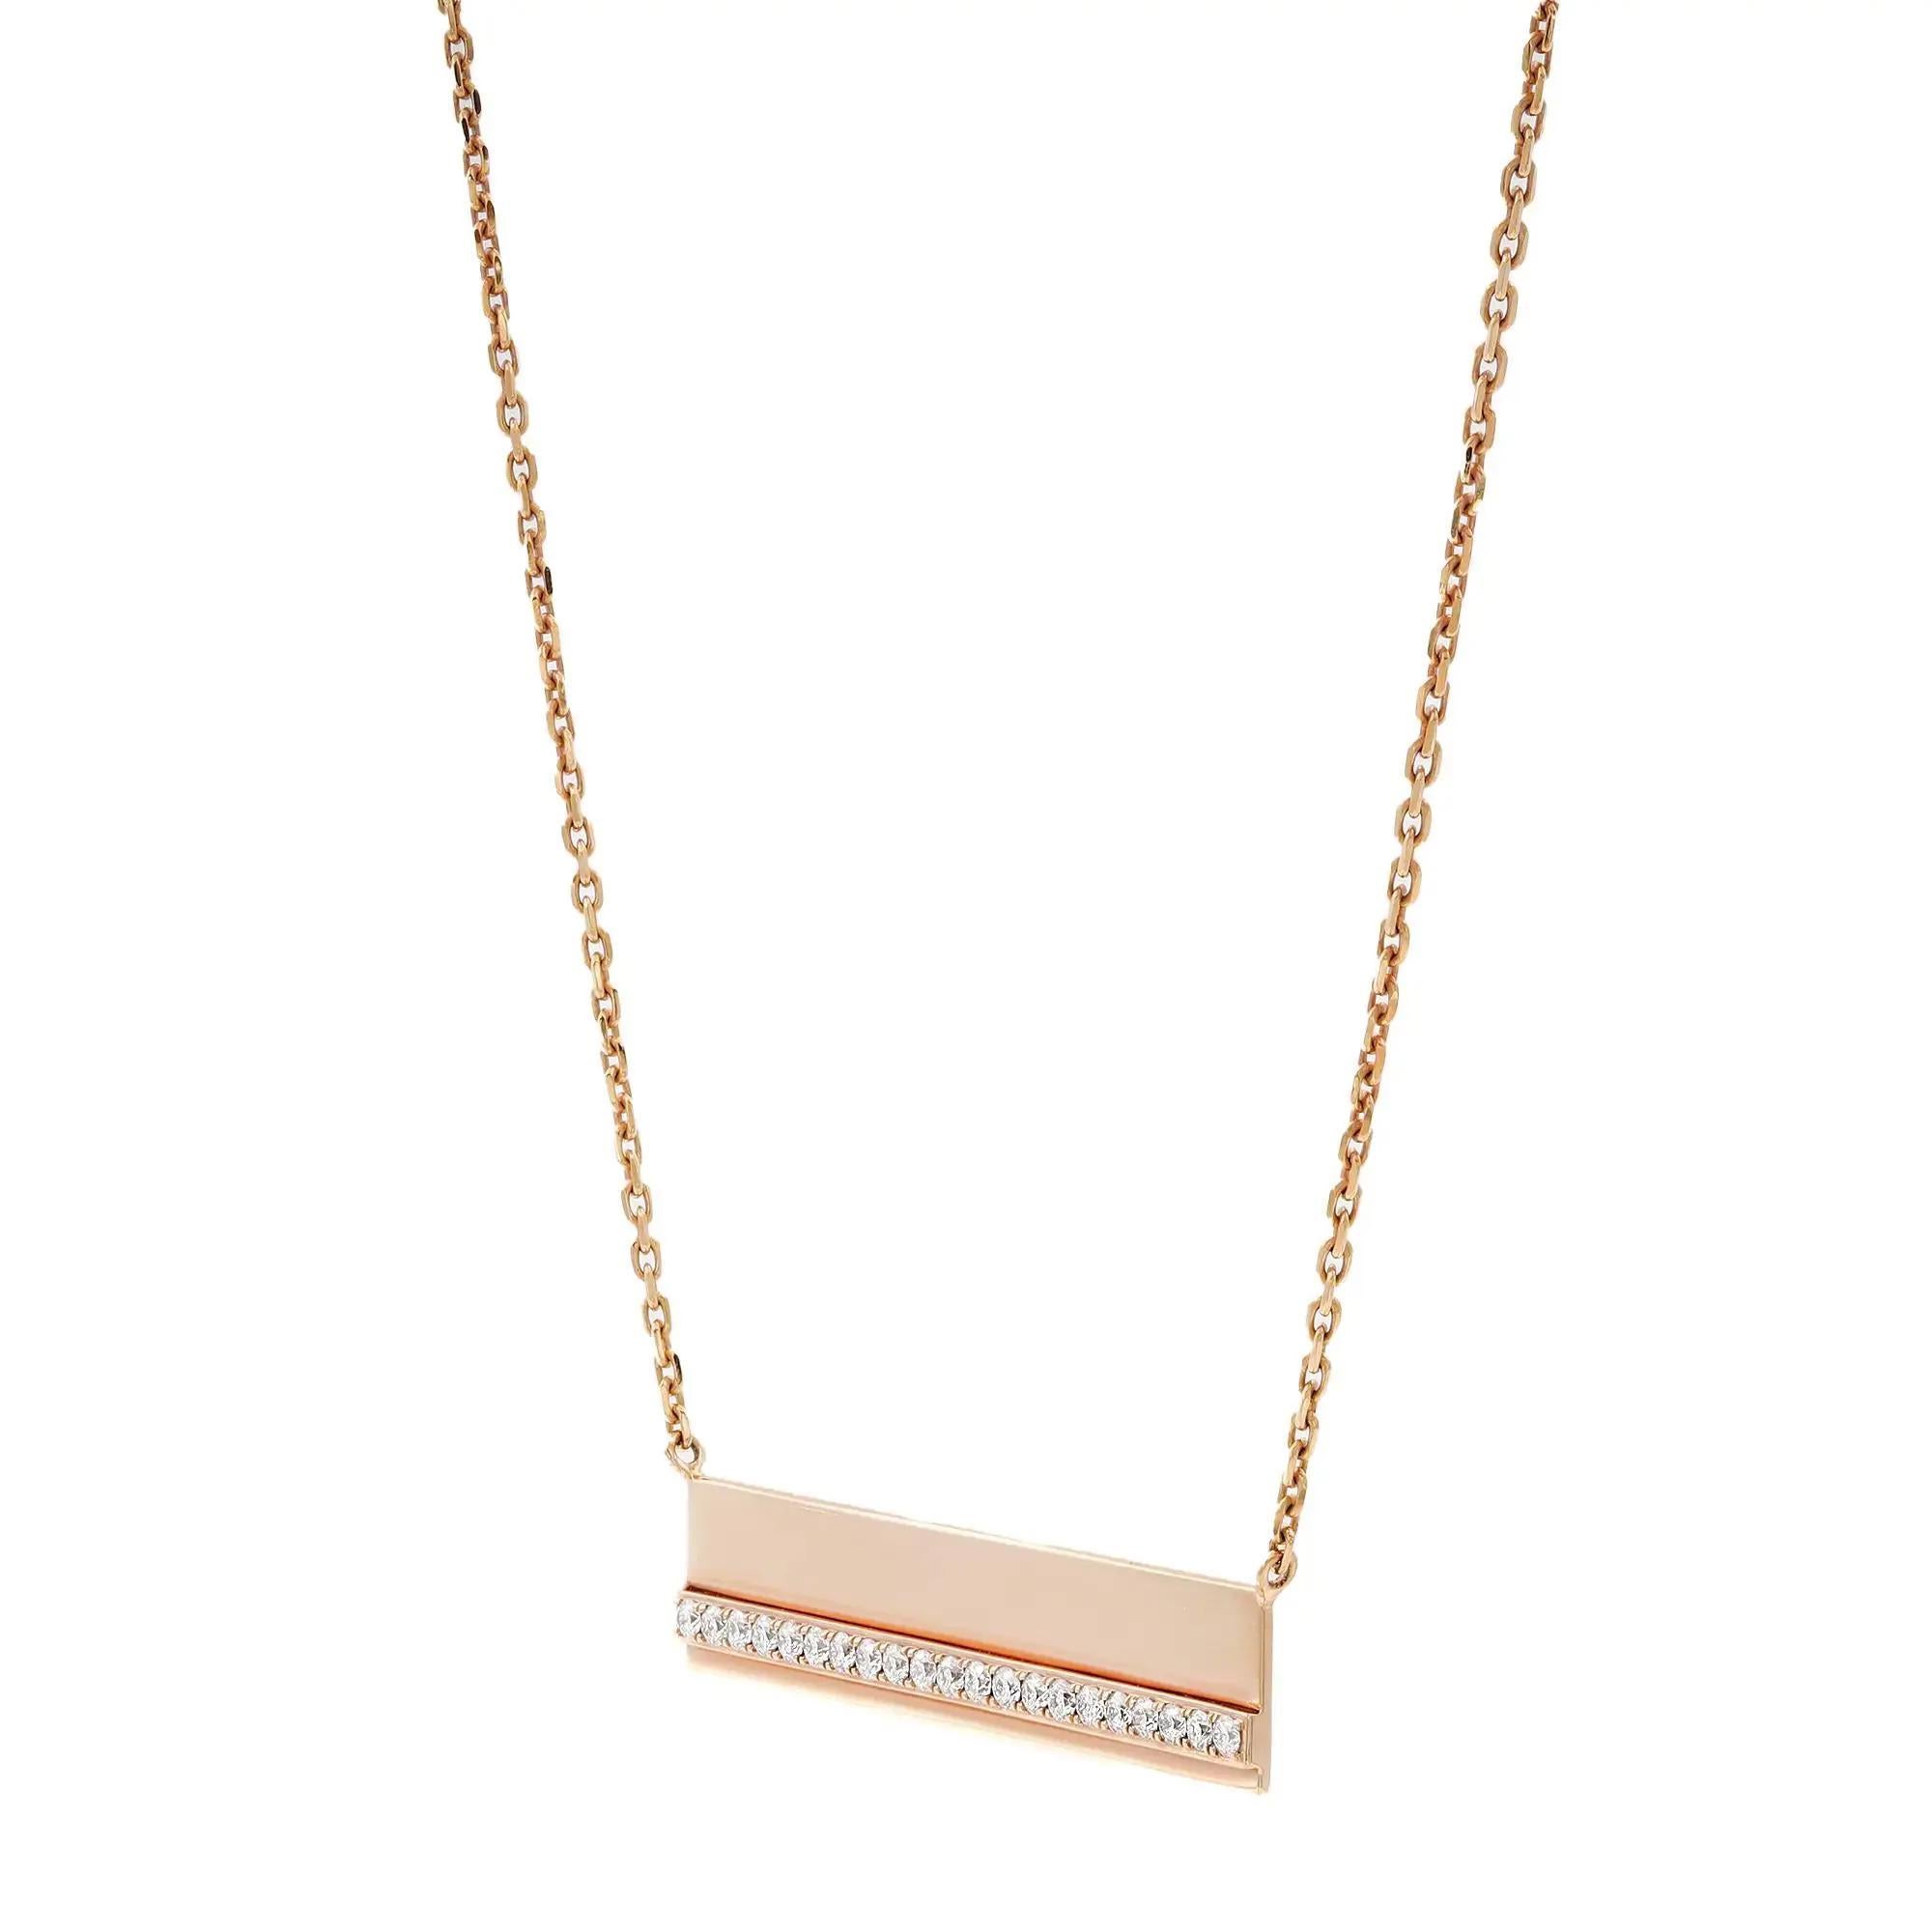 Taille ronde Messika 0.36Cttw Kate Diamond Bar Pendant Chain Necklace 18K Rose Gold 17 Inches en vente